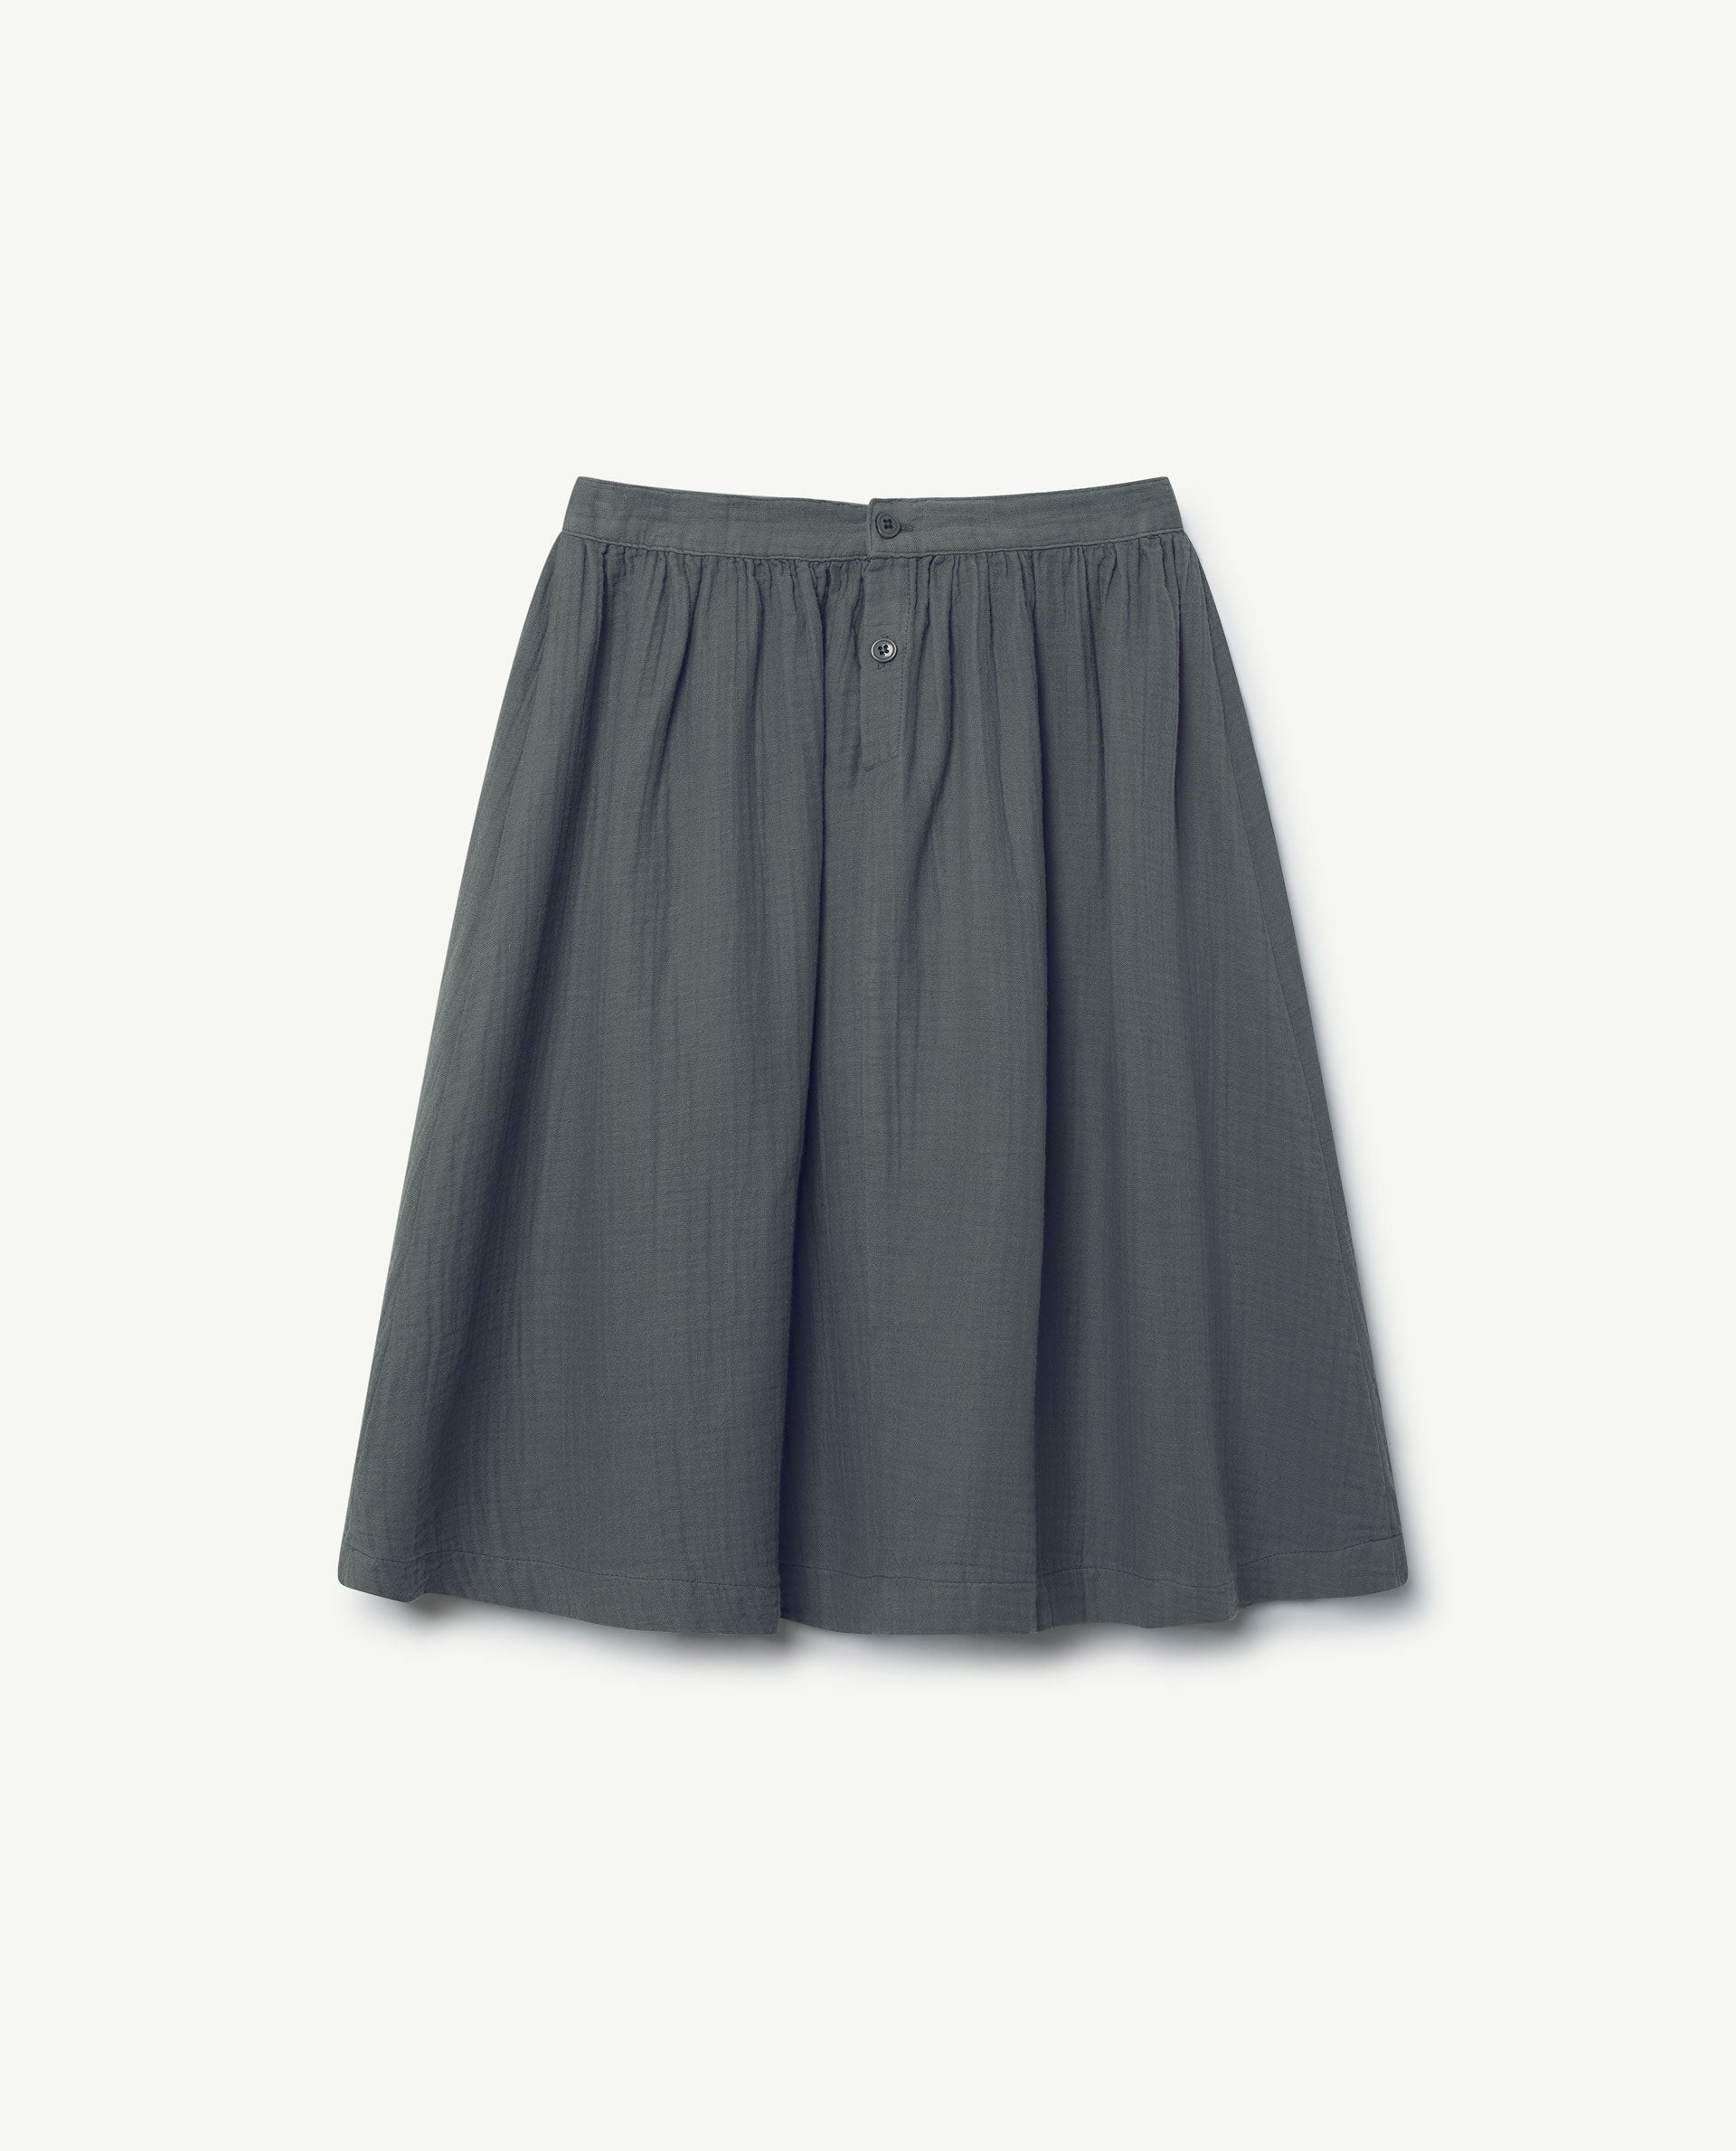 The Animals Observatory Sow Skirt - Grey/Navy